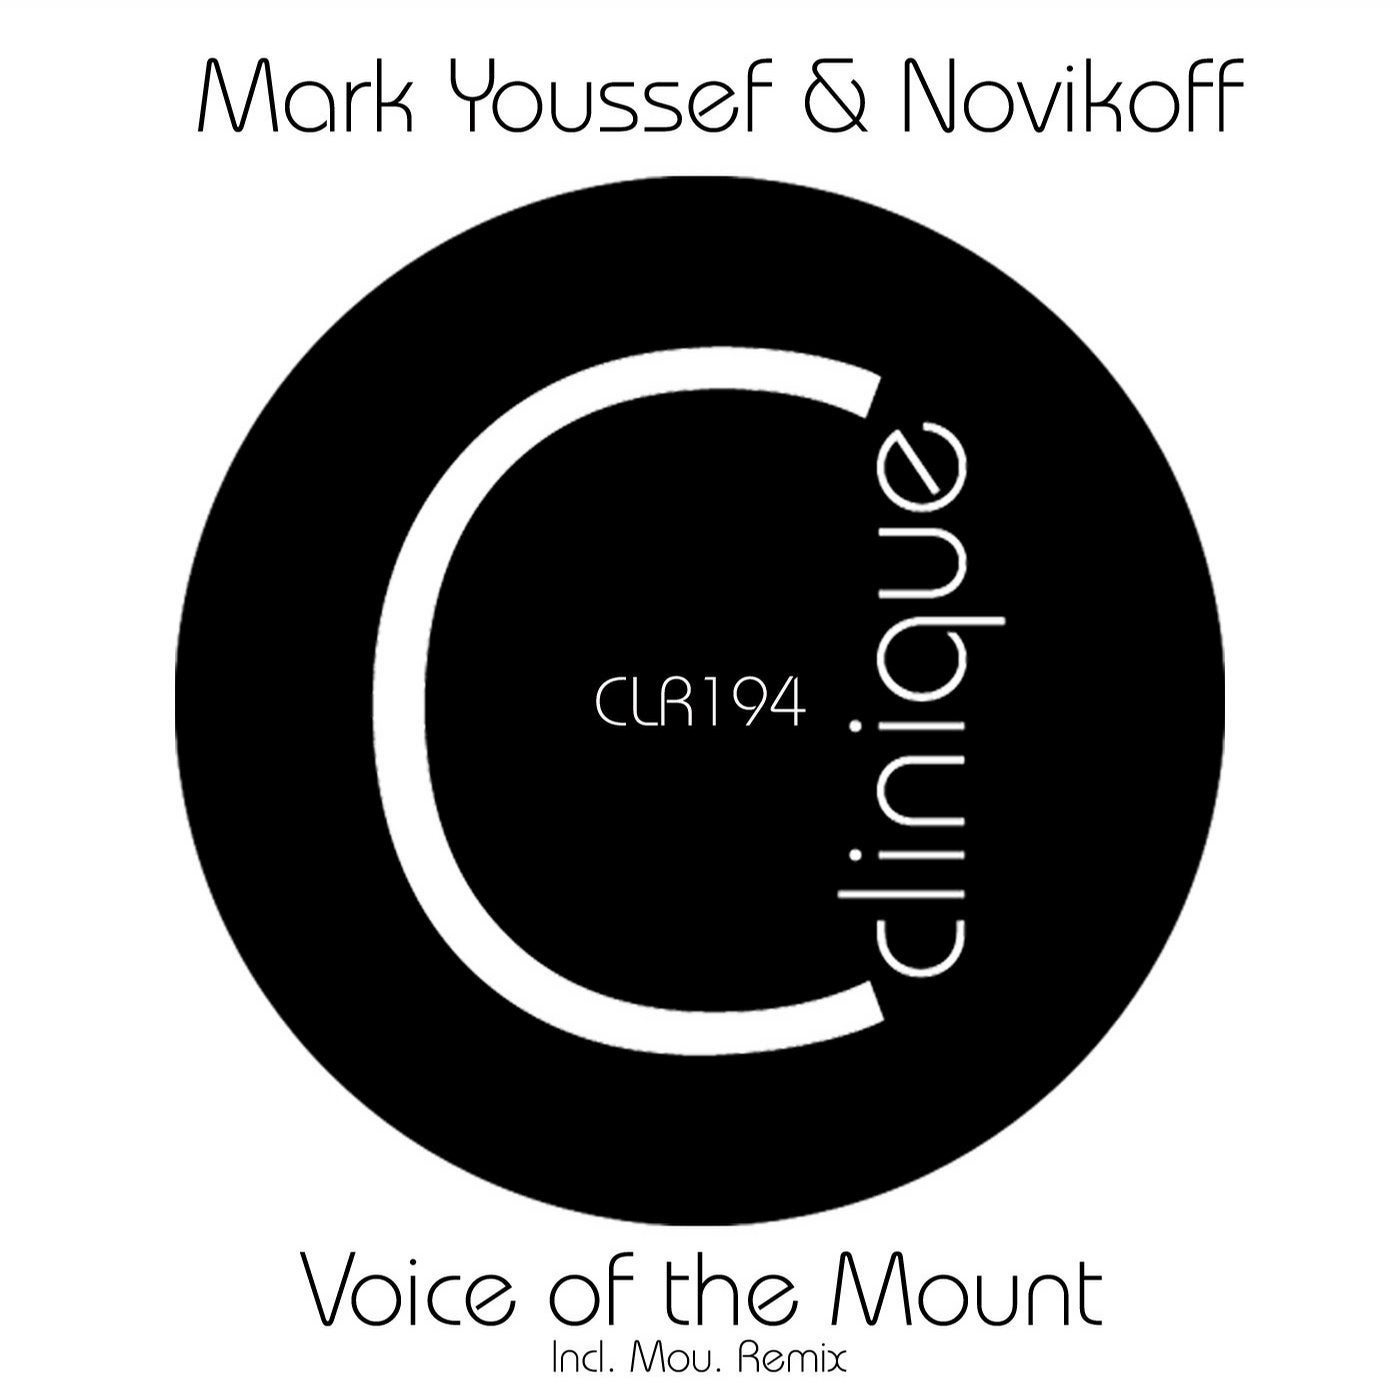 Voice of the Mount